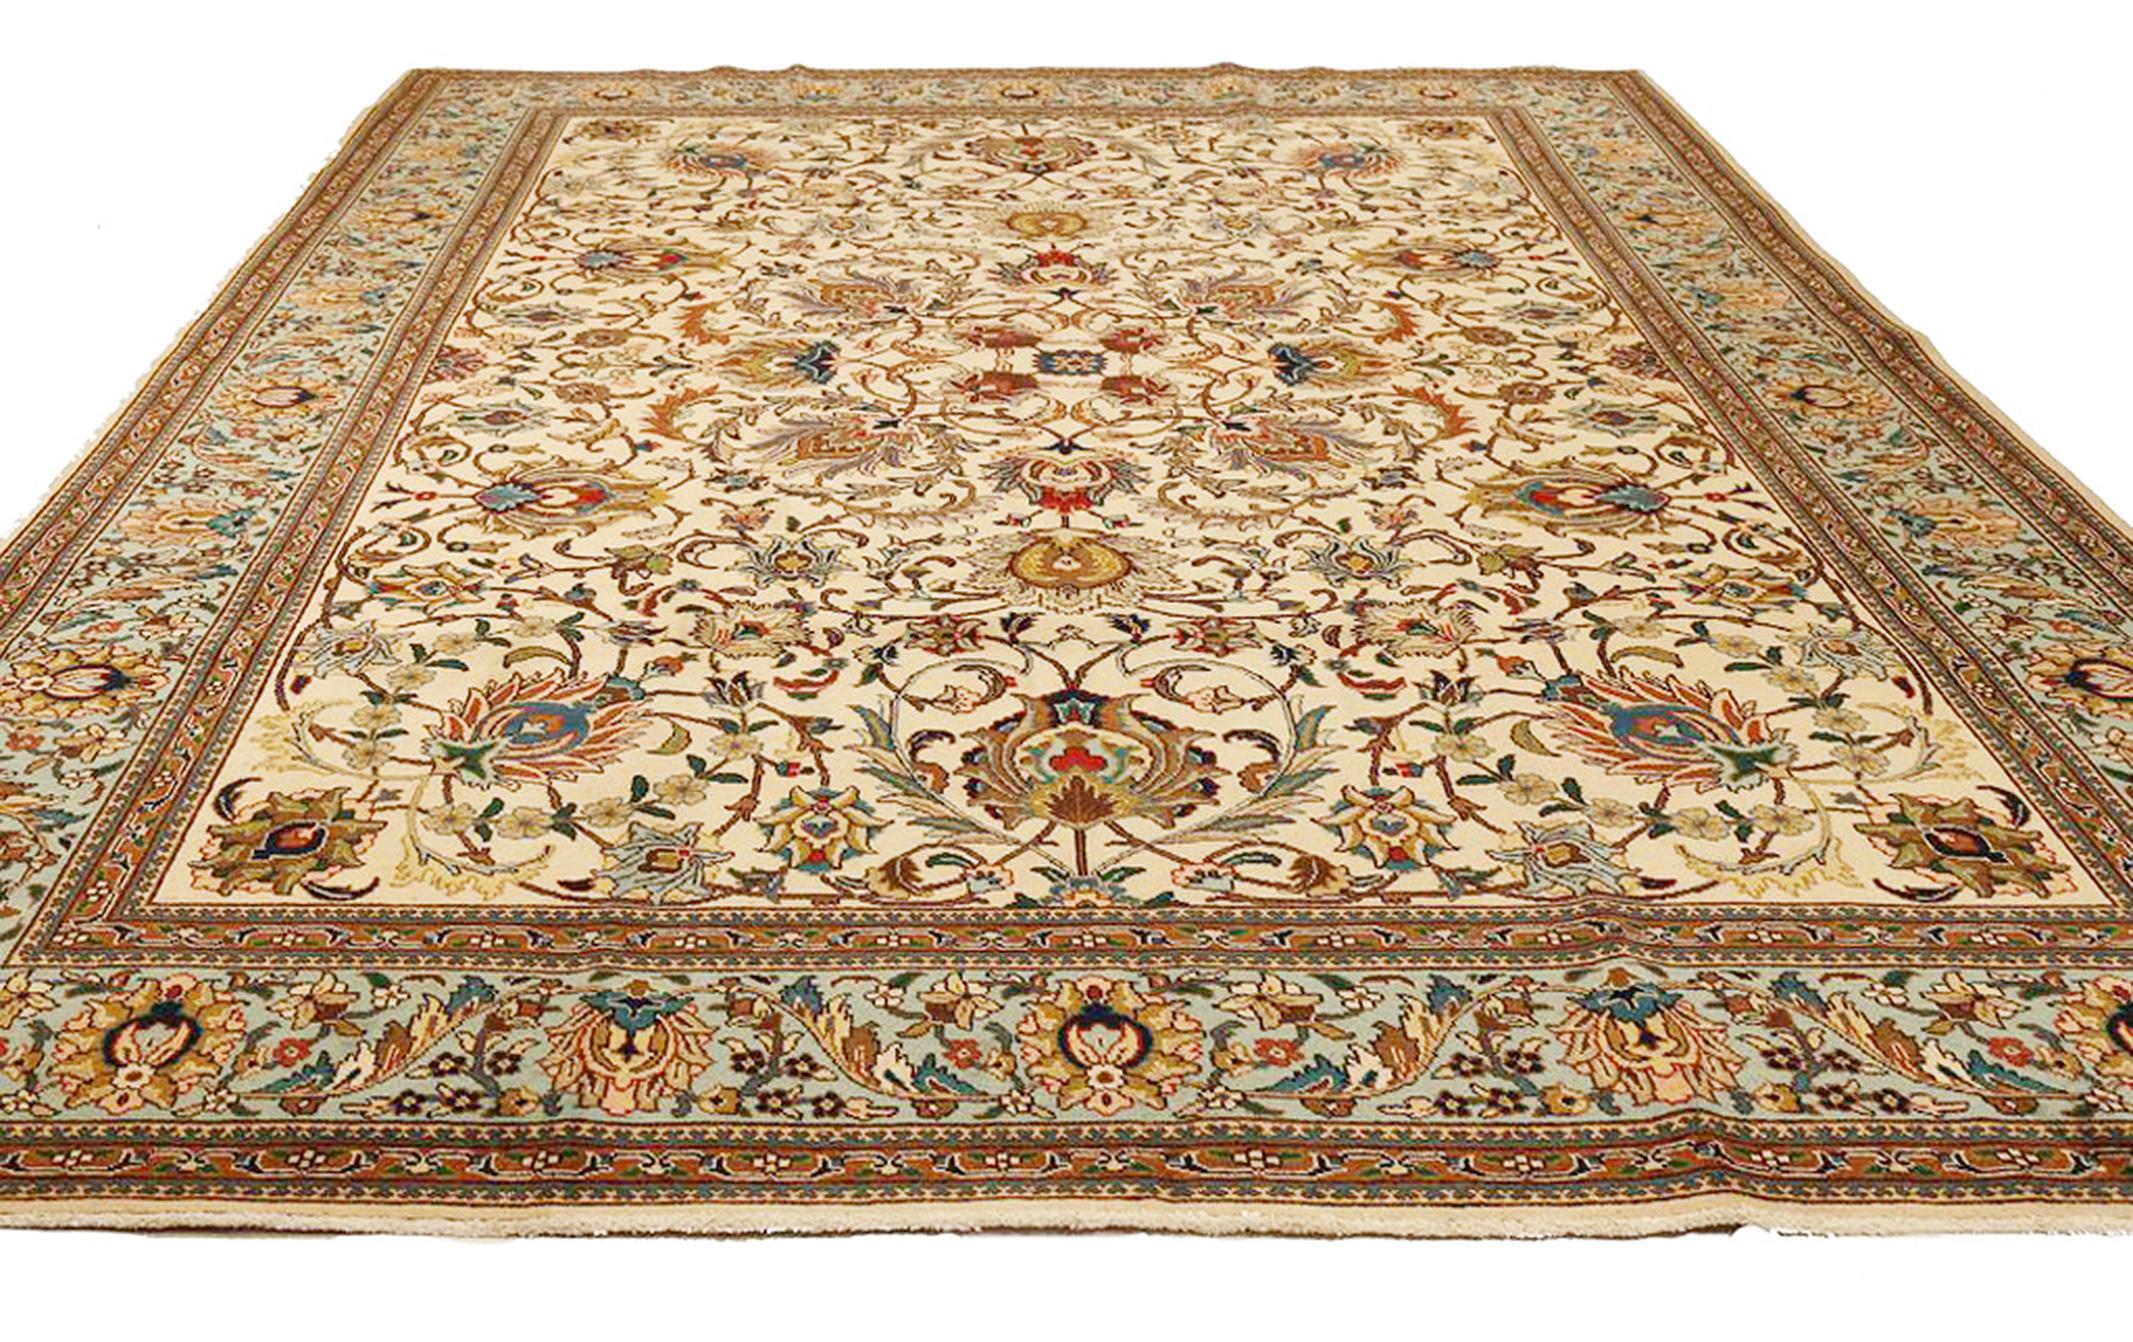 Antique Persian rug handwoven from the finest sheep’s wool and colored with all-natural vegetable dyes that are safe for humans and pets. It’s a traditional Tabriz weaving featuring a lovely ensemble of floral designs in various colors over an ivory